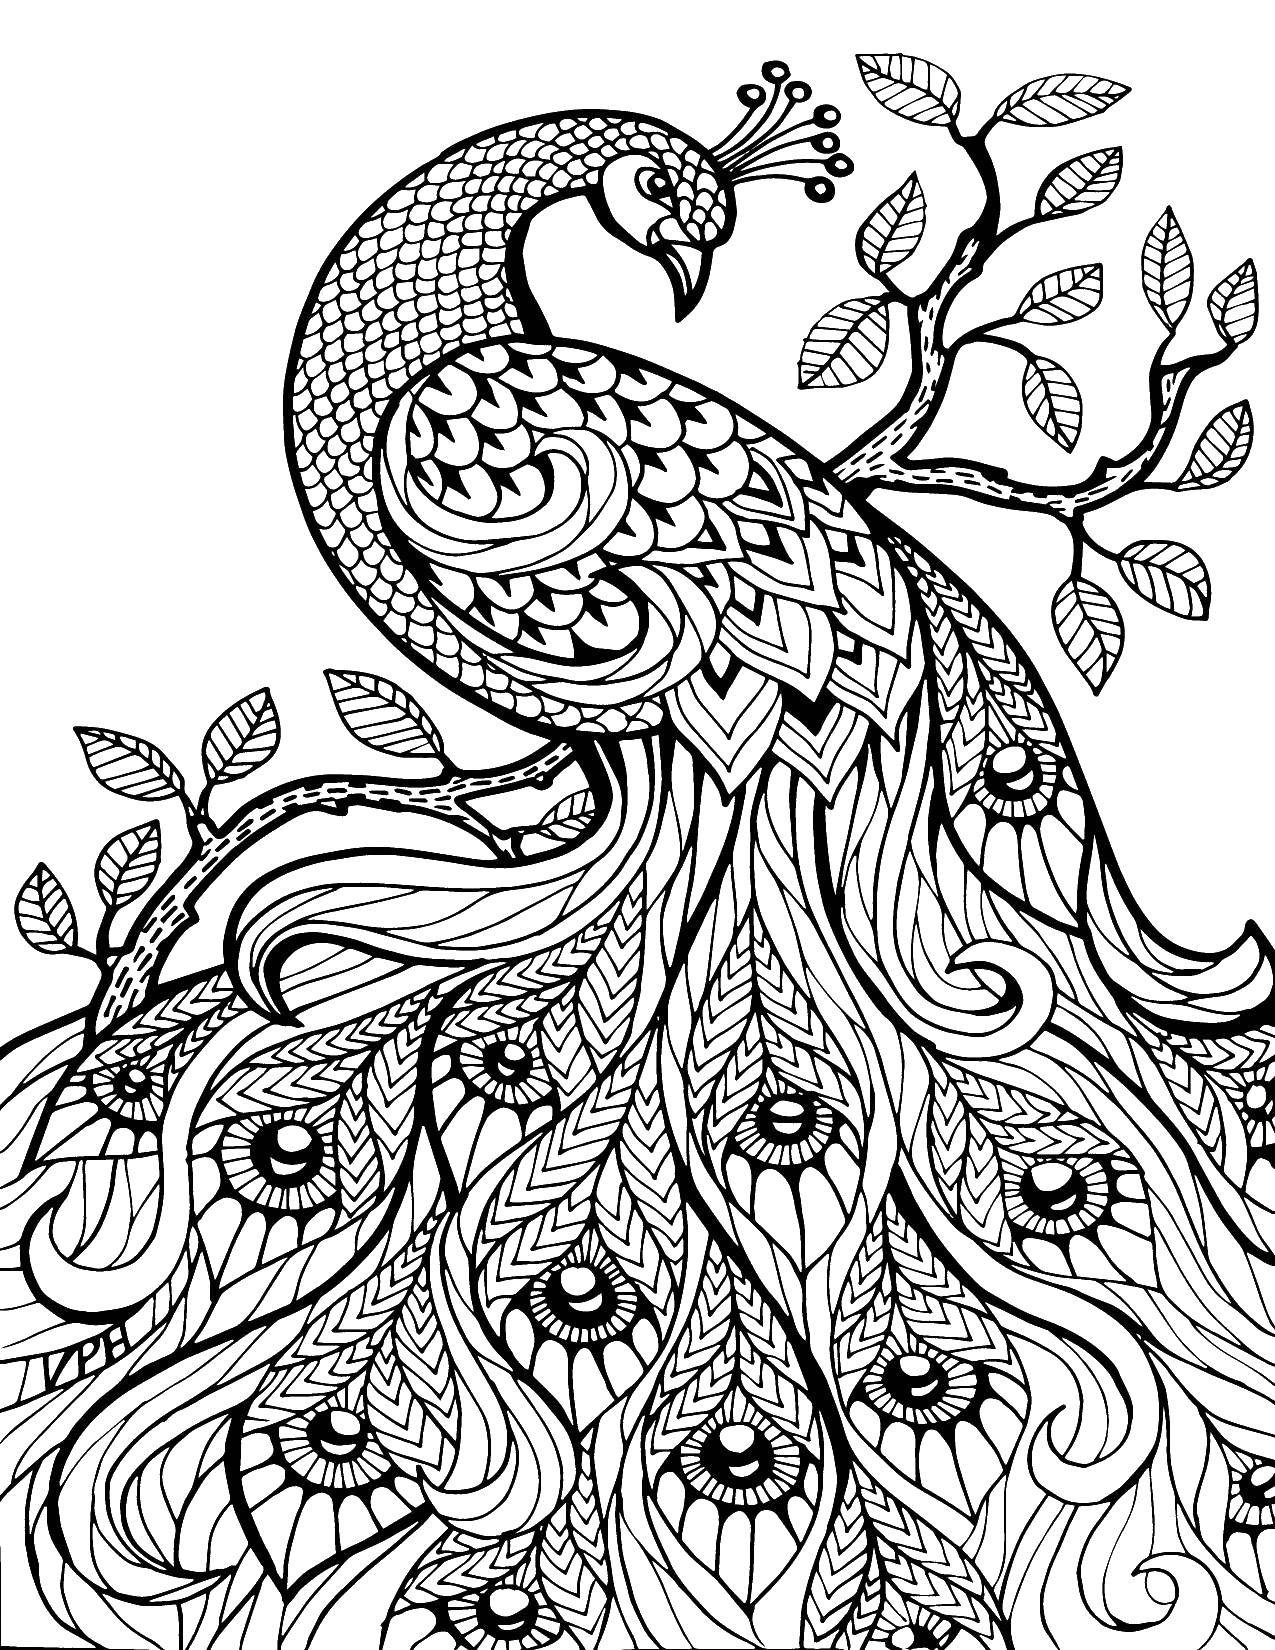 Coloring Peacock. Category birds. Tags:  Peacock.